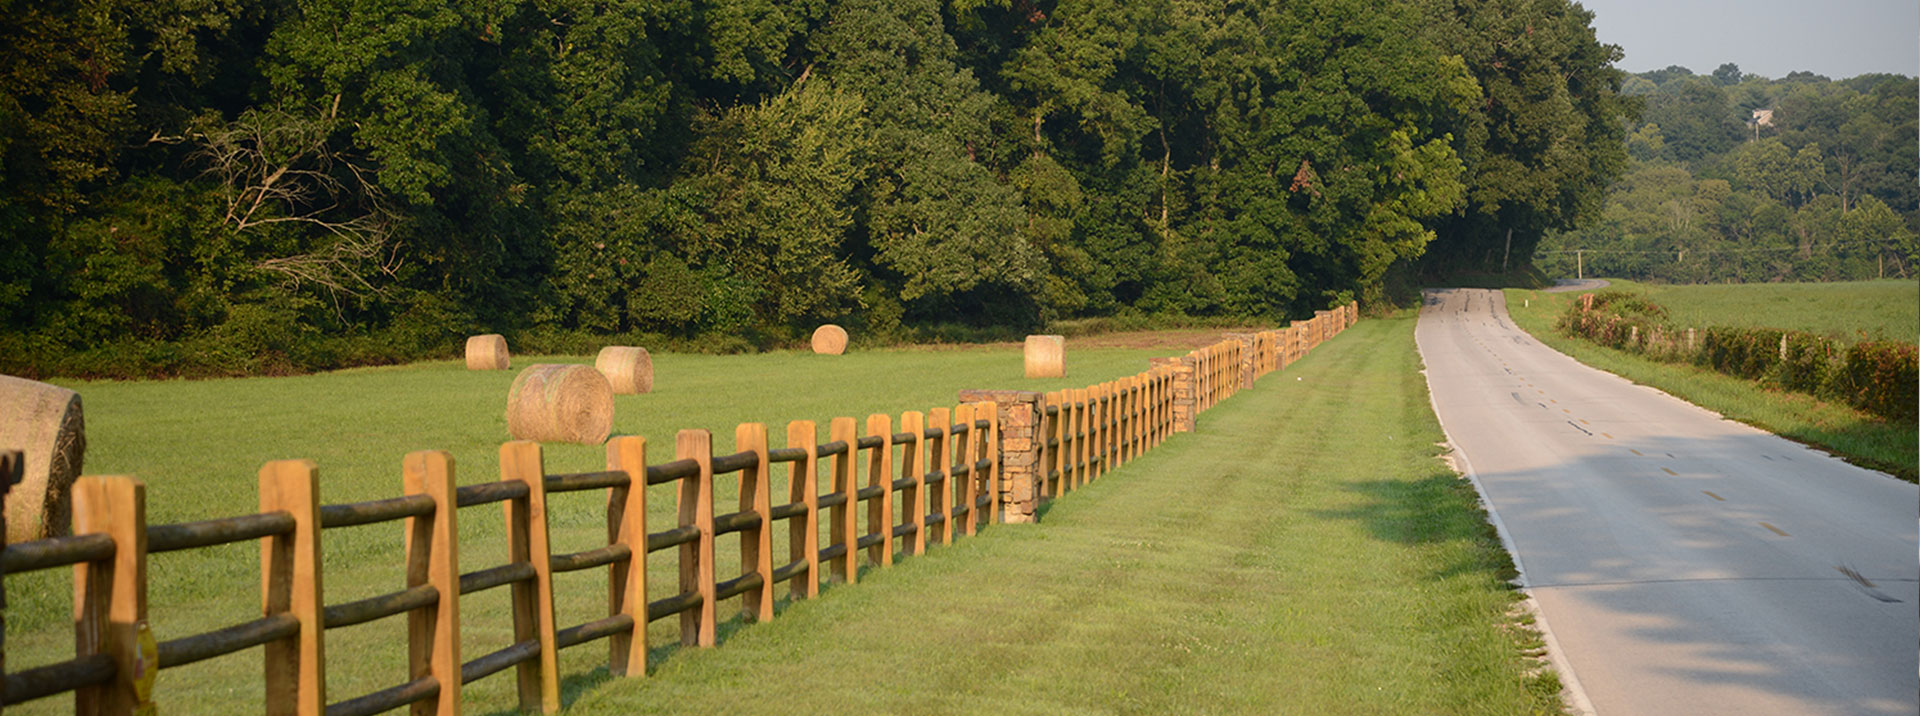 Country road with fence and hay bales. 